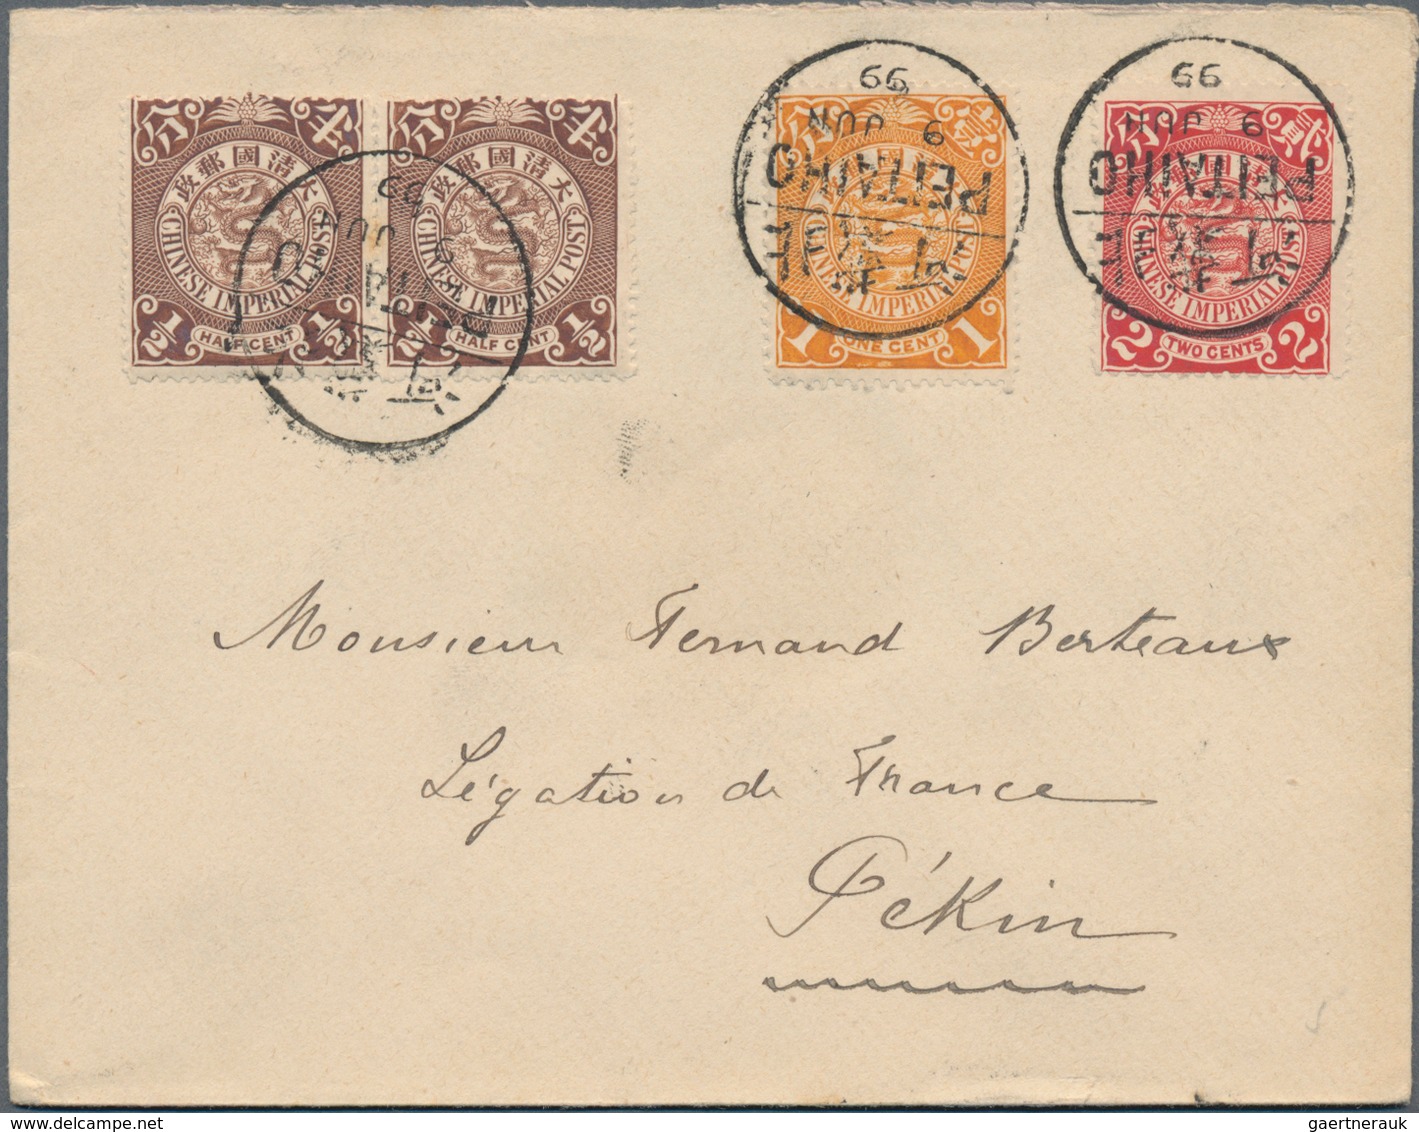 China: 1898, coiling dragons on inland covers: 2 C. (3) Canton-Peking, 1 C. single 2 resp. C. (2) Sh